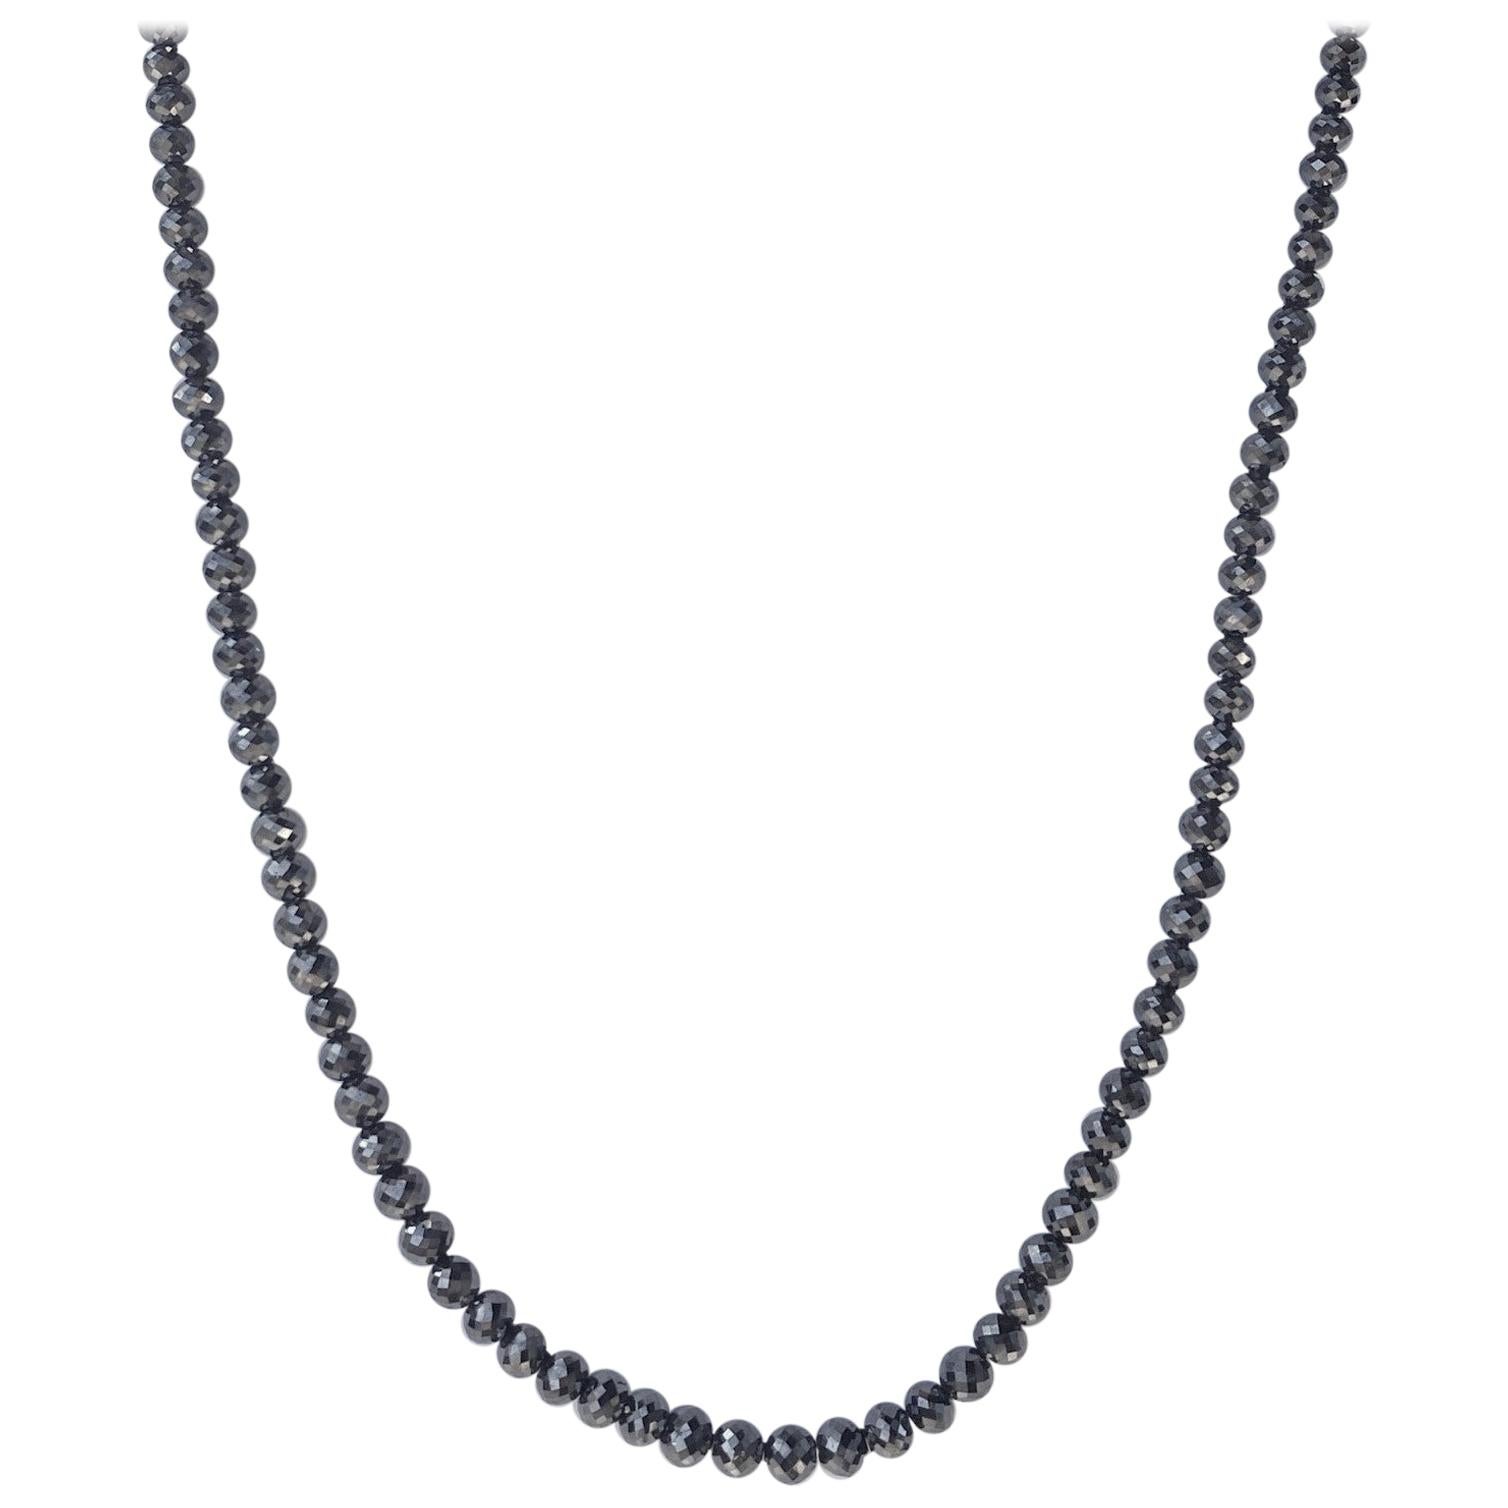 Black Diamond Necklace with White Gold Clasp